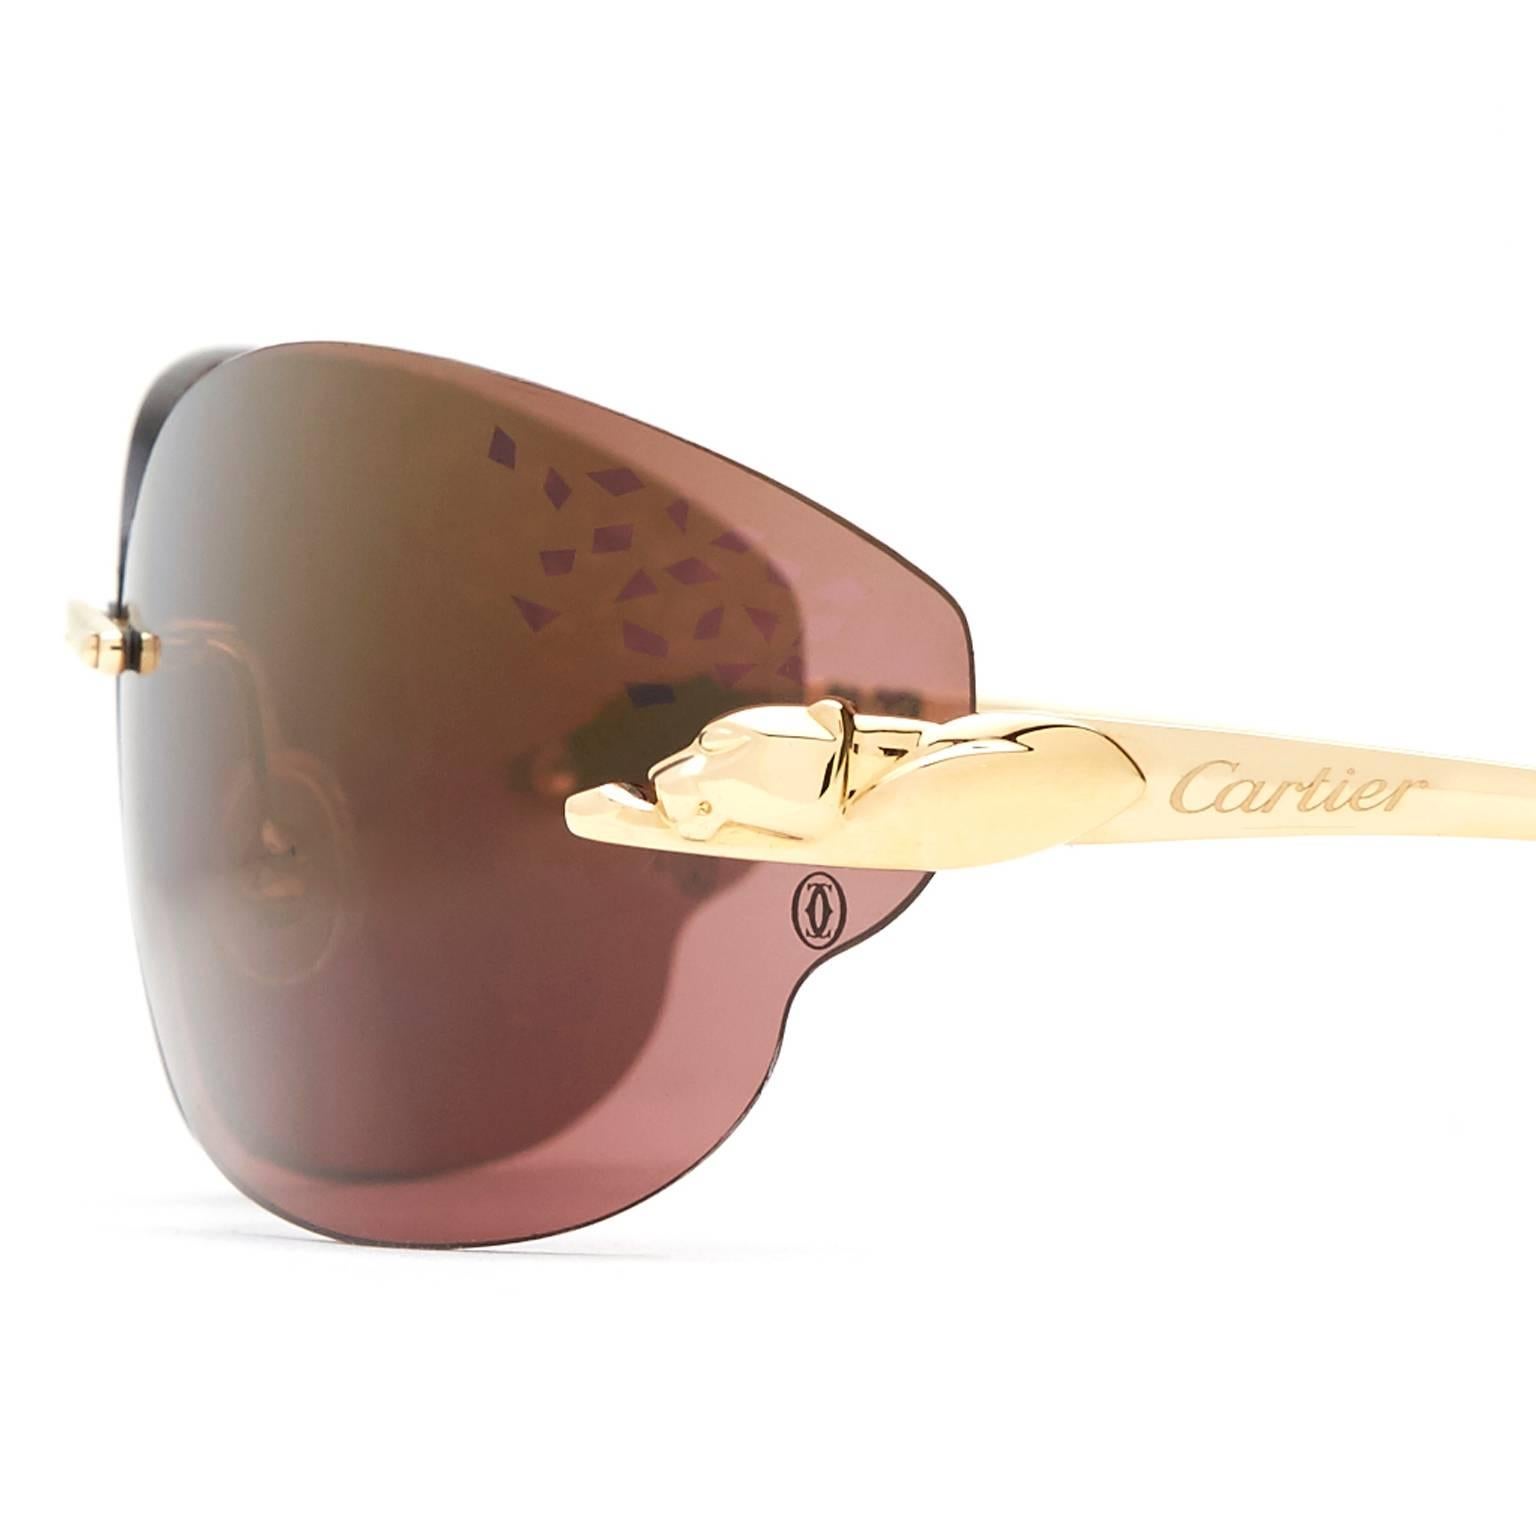 Cartier Panther rimless woman sunglasses. They are embellished with signature yellow gold-tone finished panthers at the hinges.